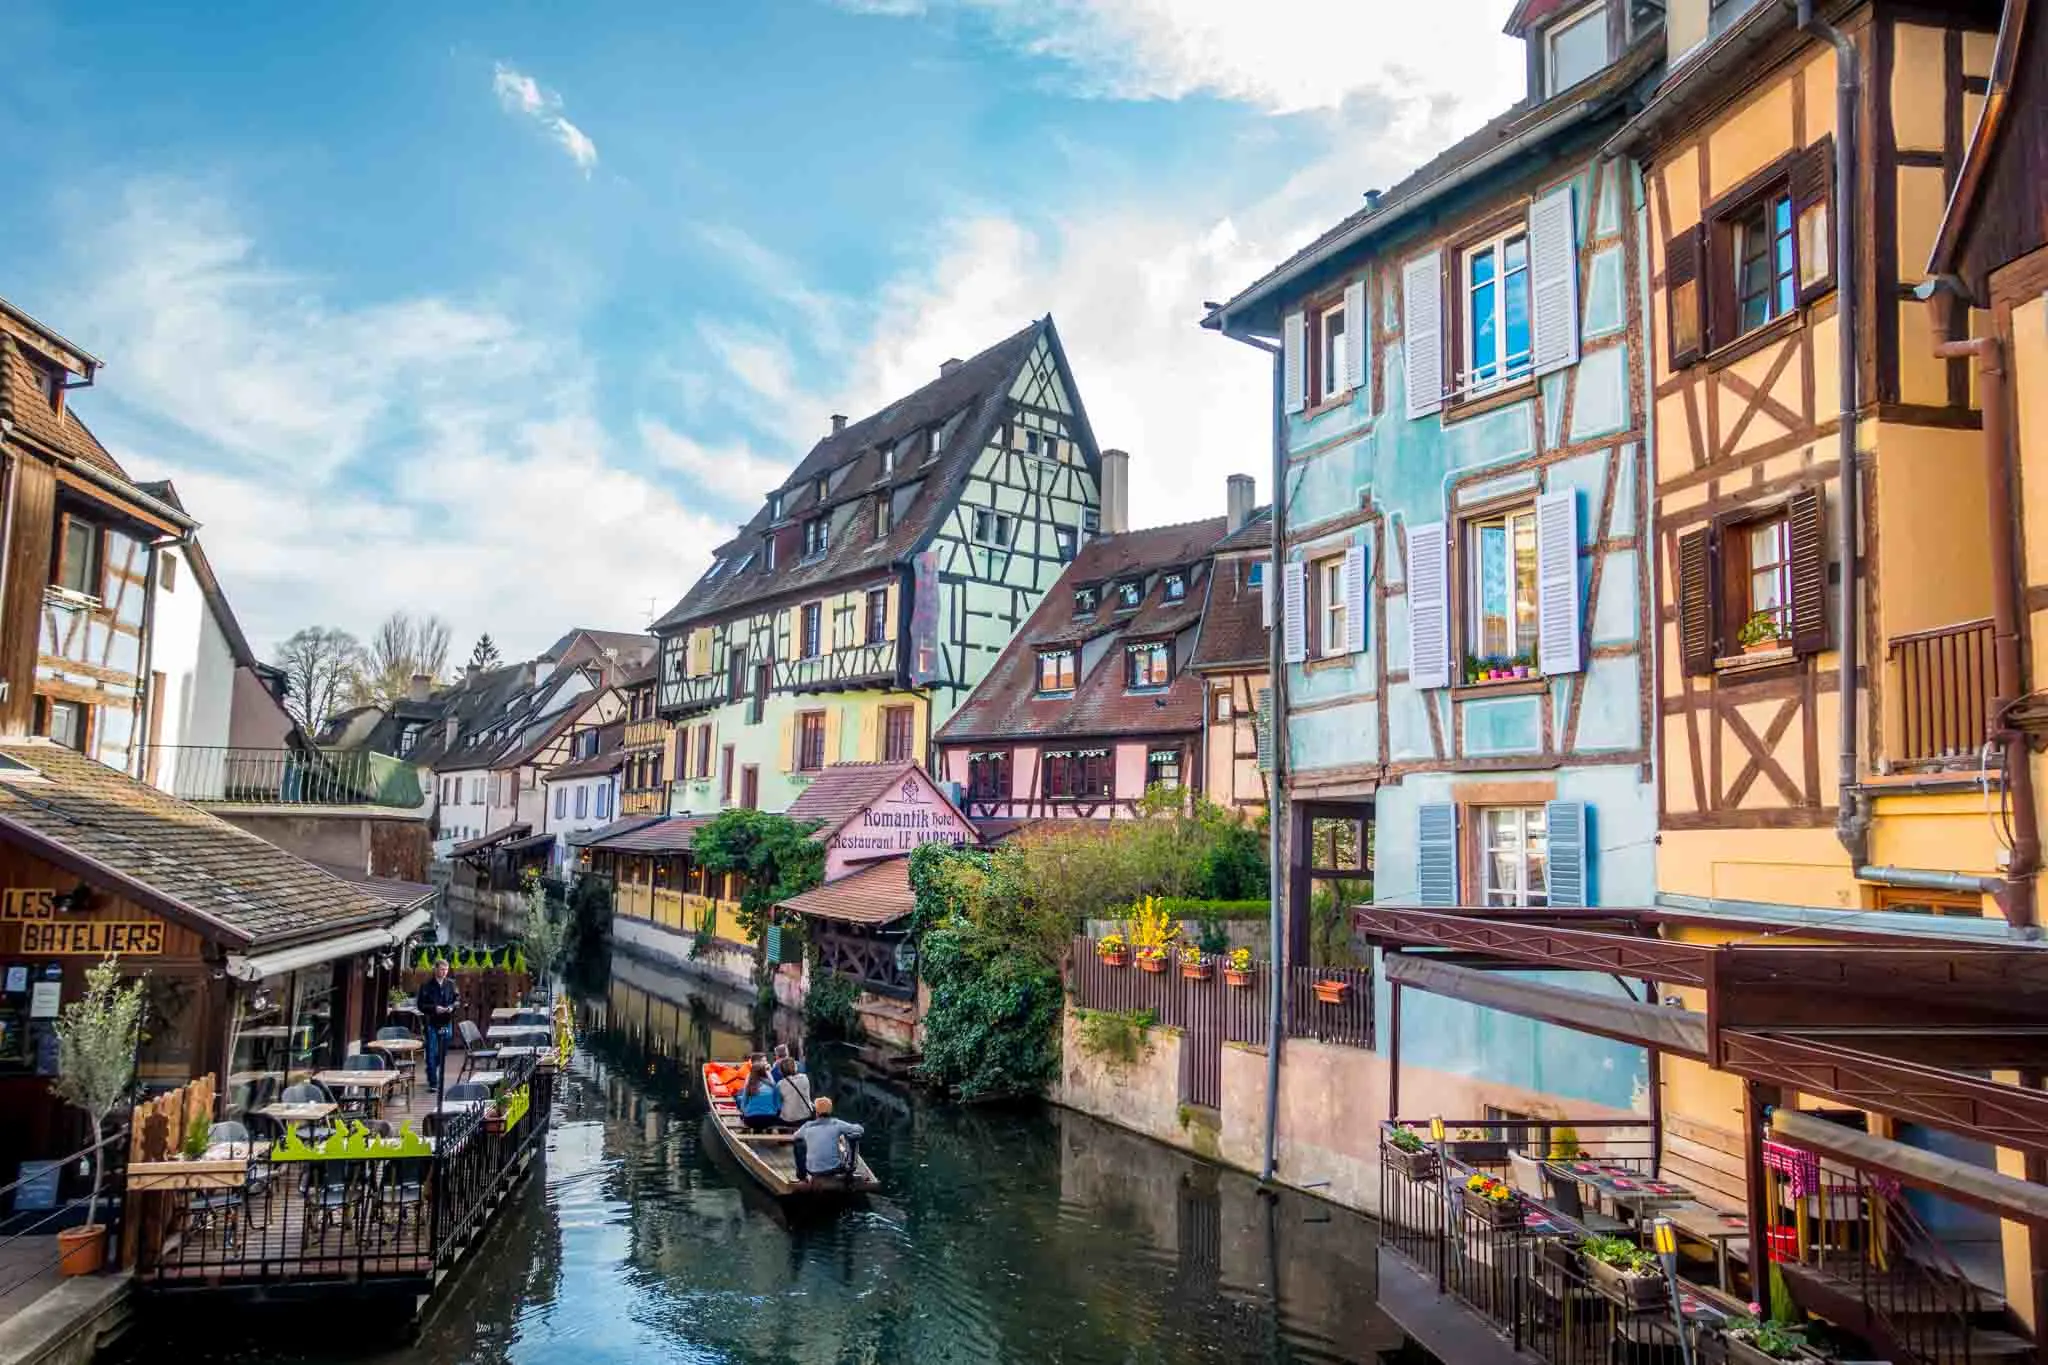 Colorful half-timbered buildings alongside river